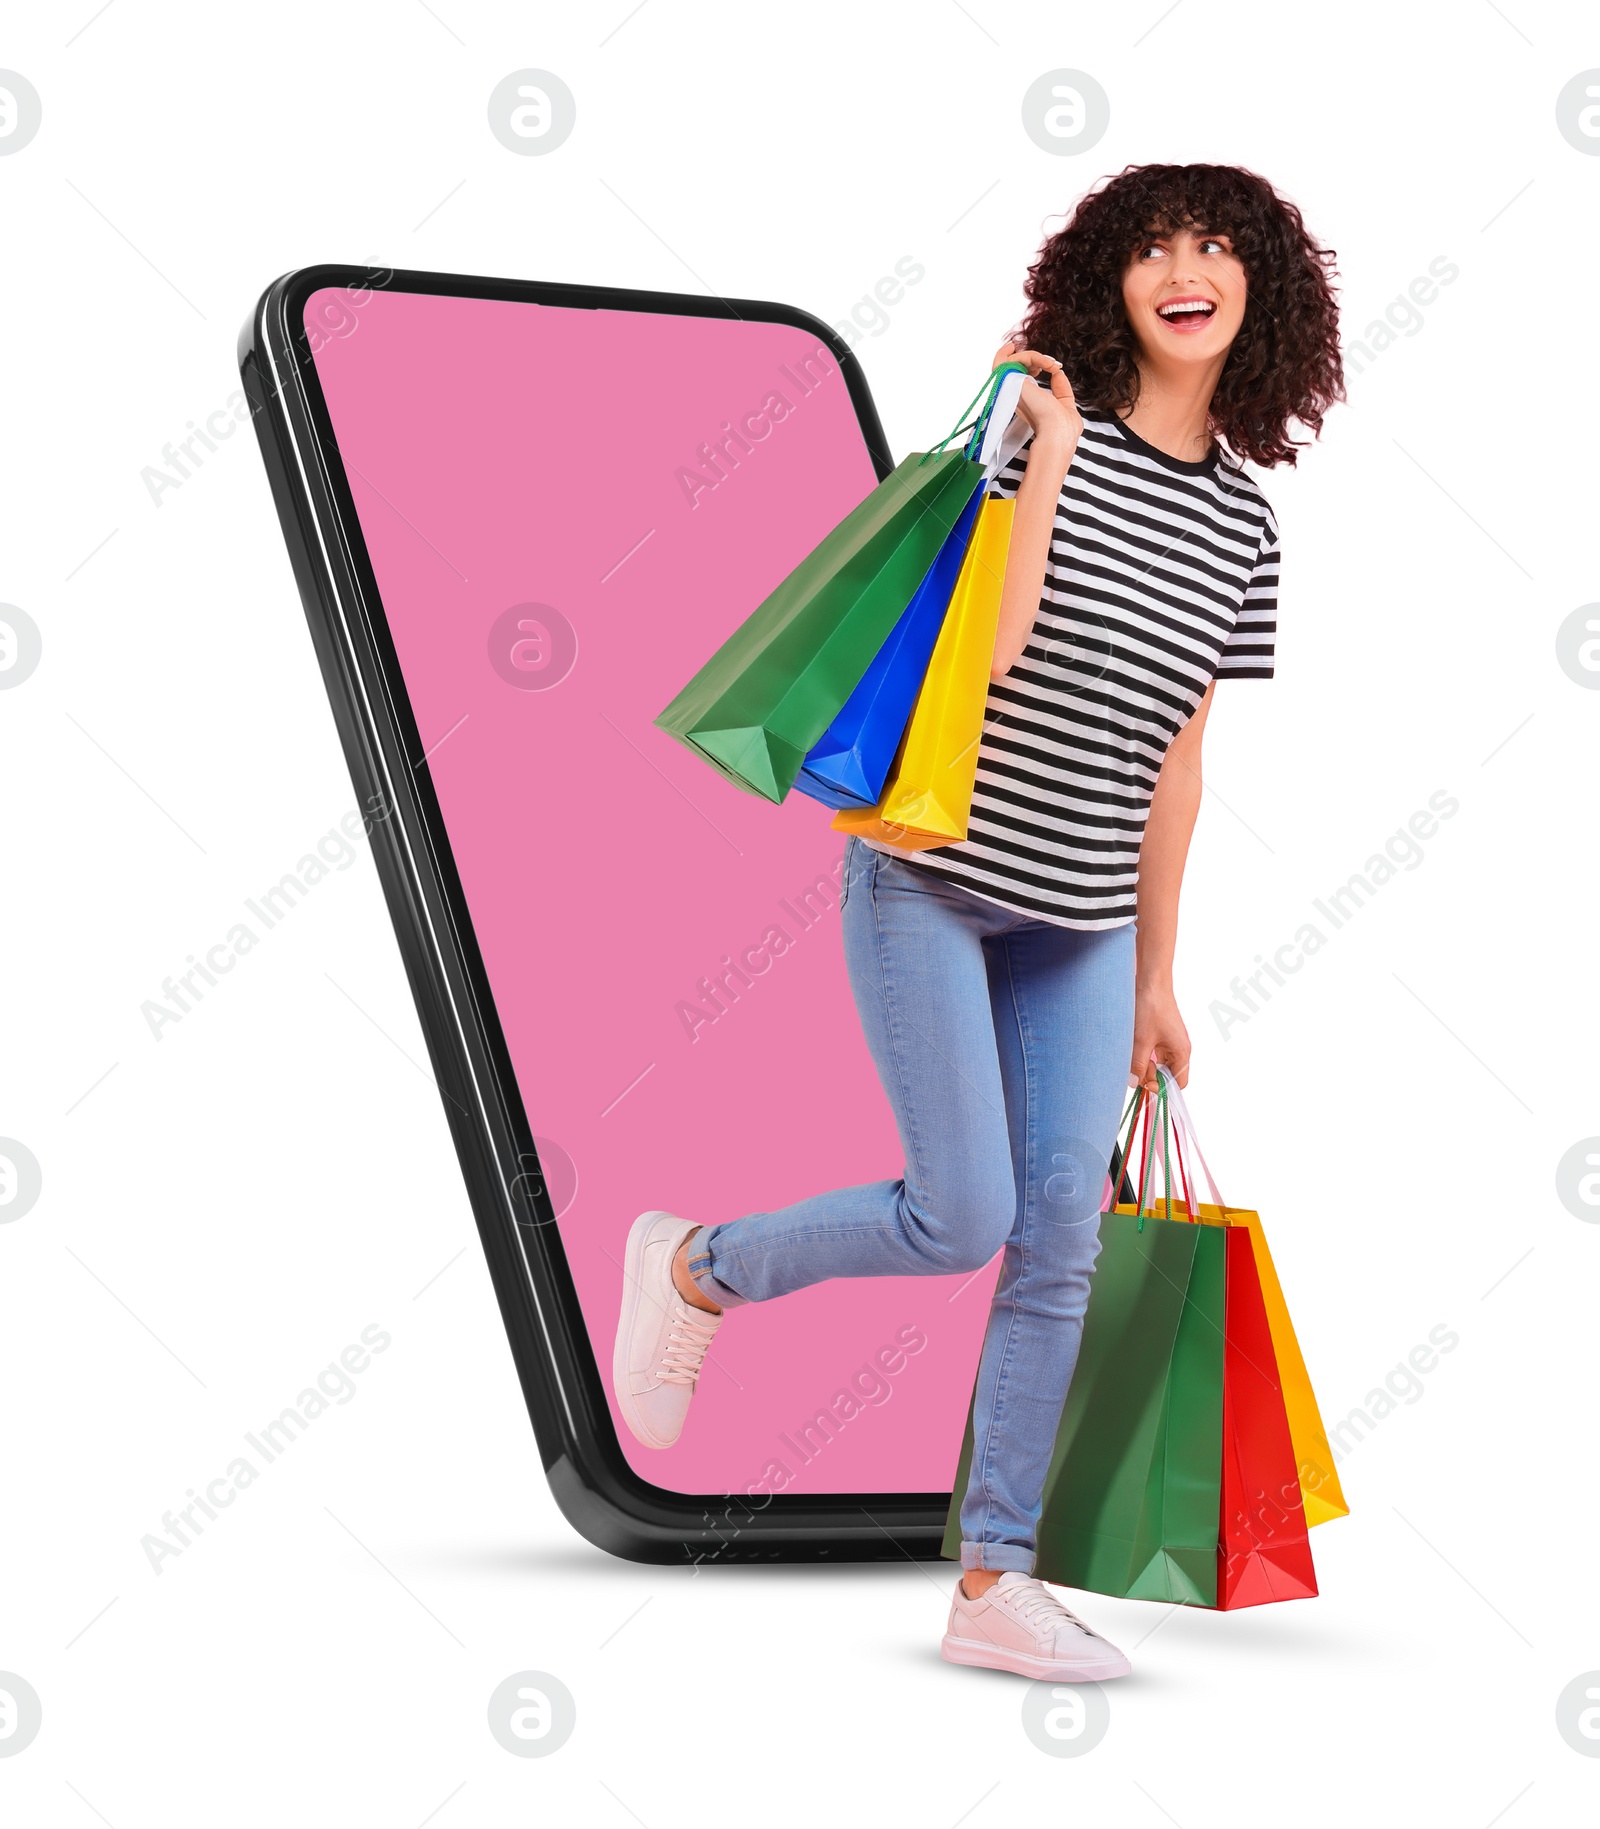 Image of Online shopping. Happy woman with paper bags walking out from smartphone on white background